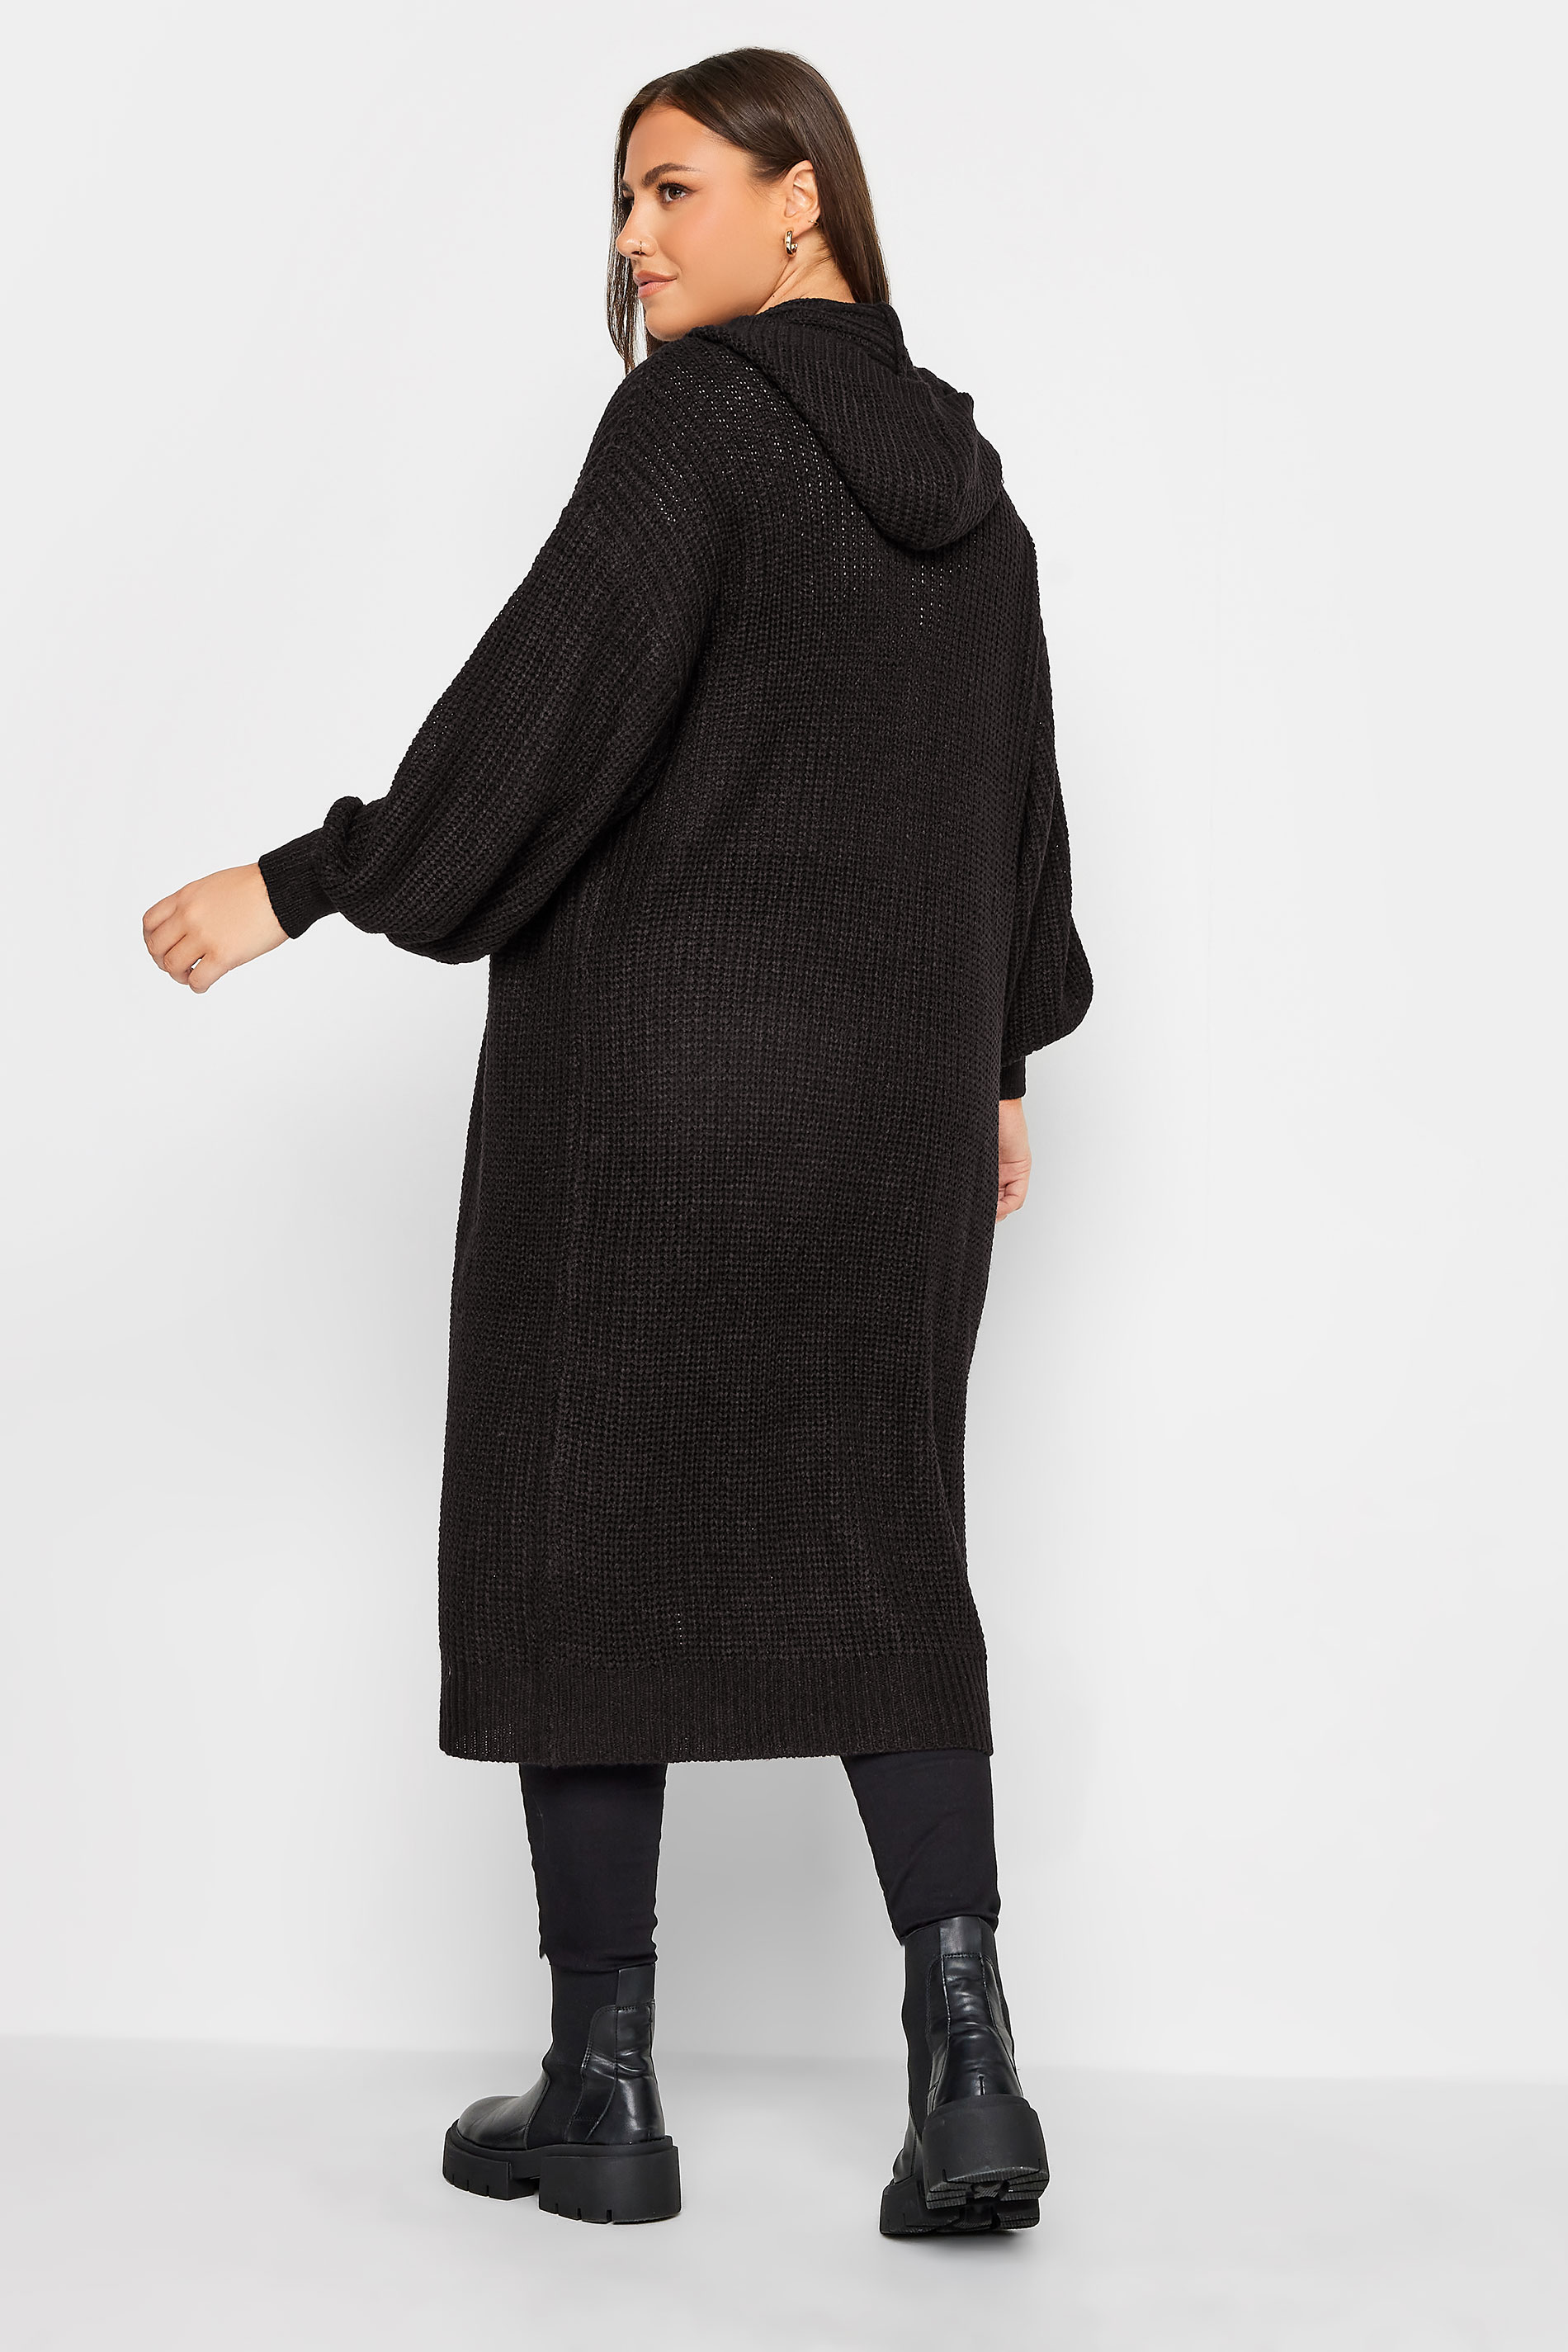 YOURS Plus Size Black Hooded Longline Cardigan | Yours Clothing 3